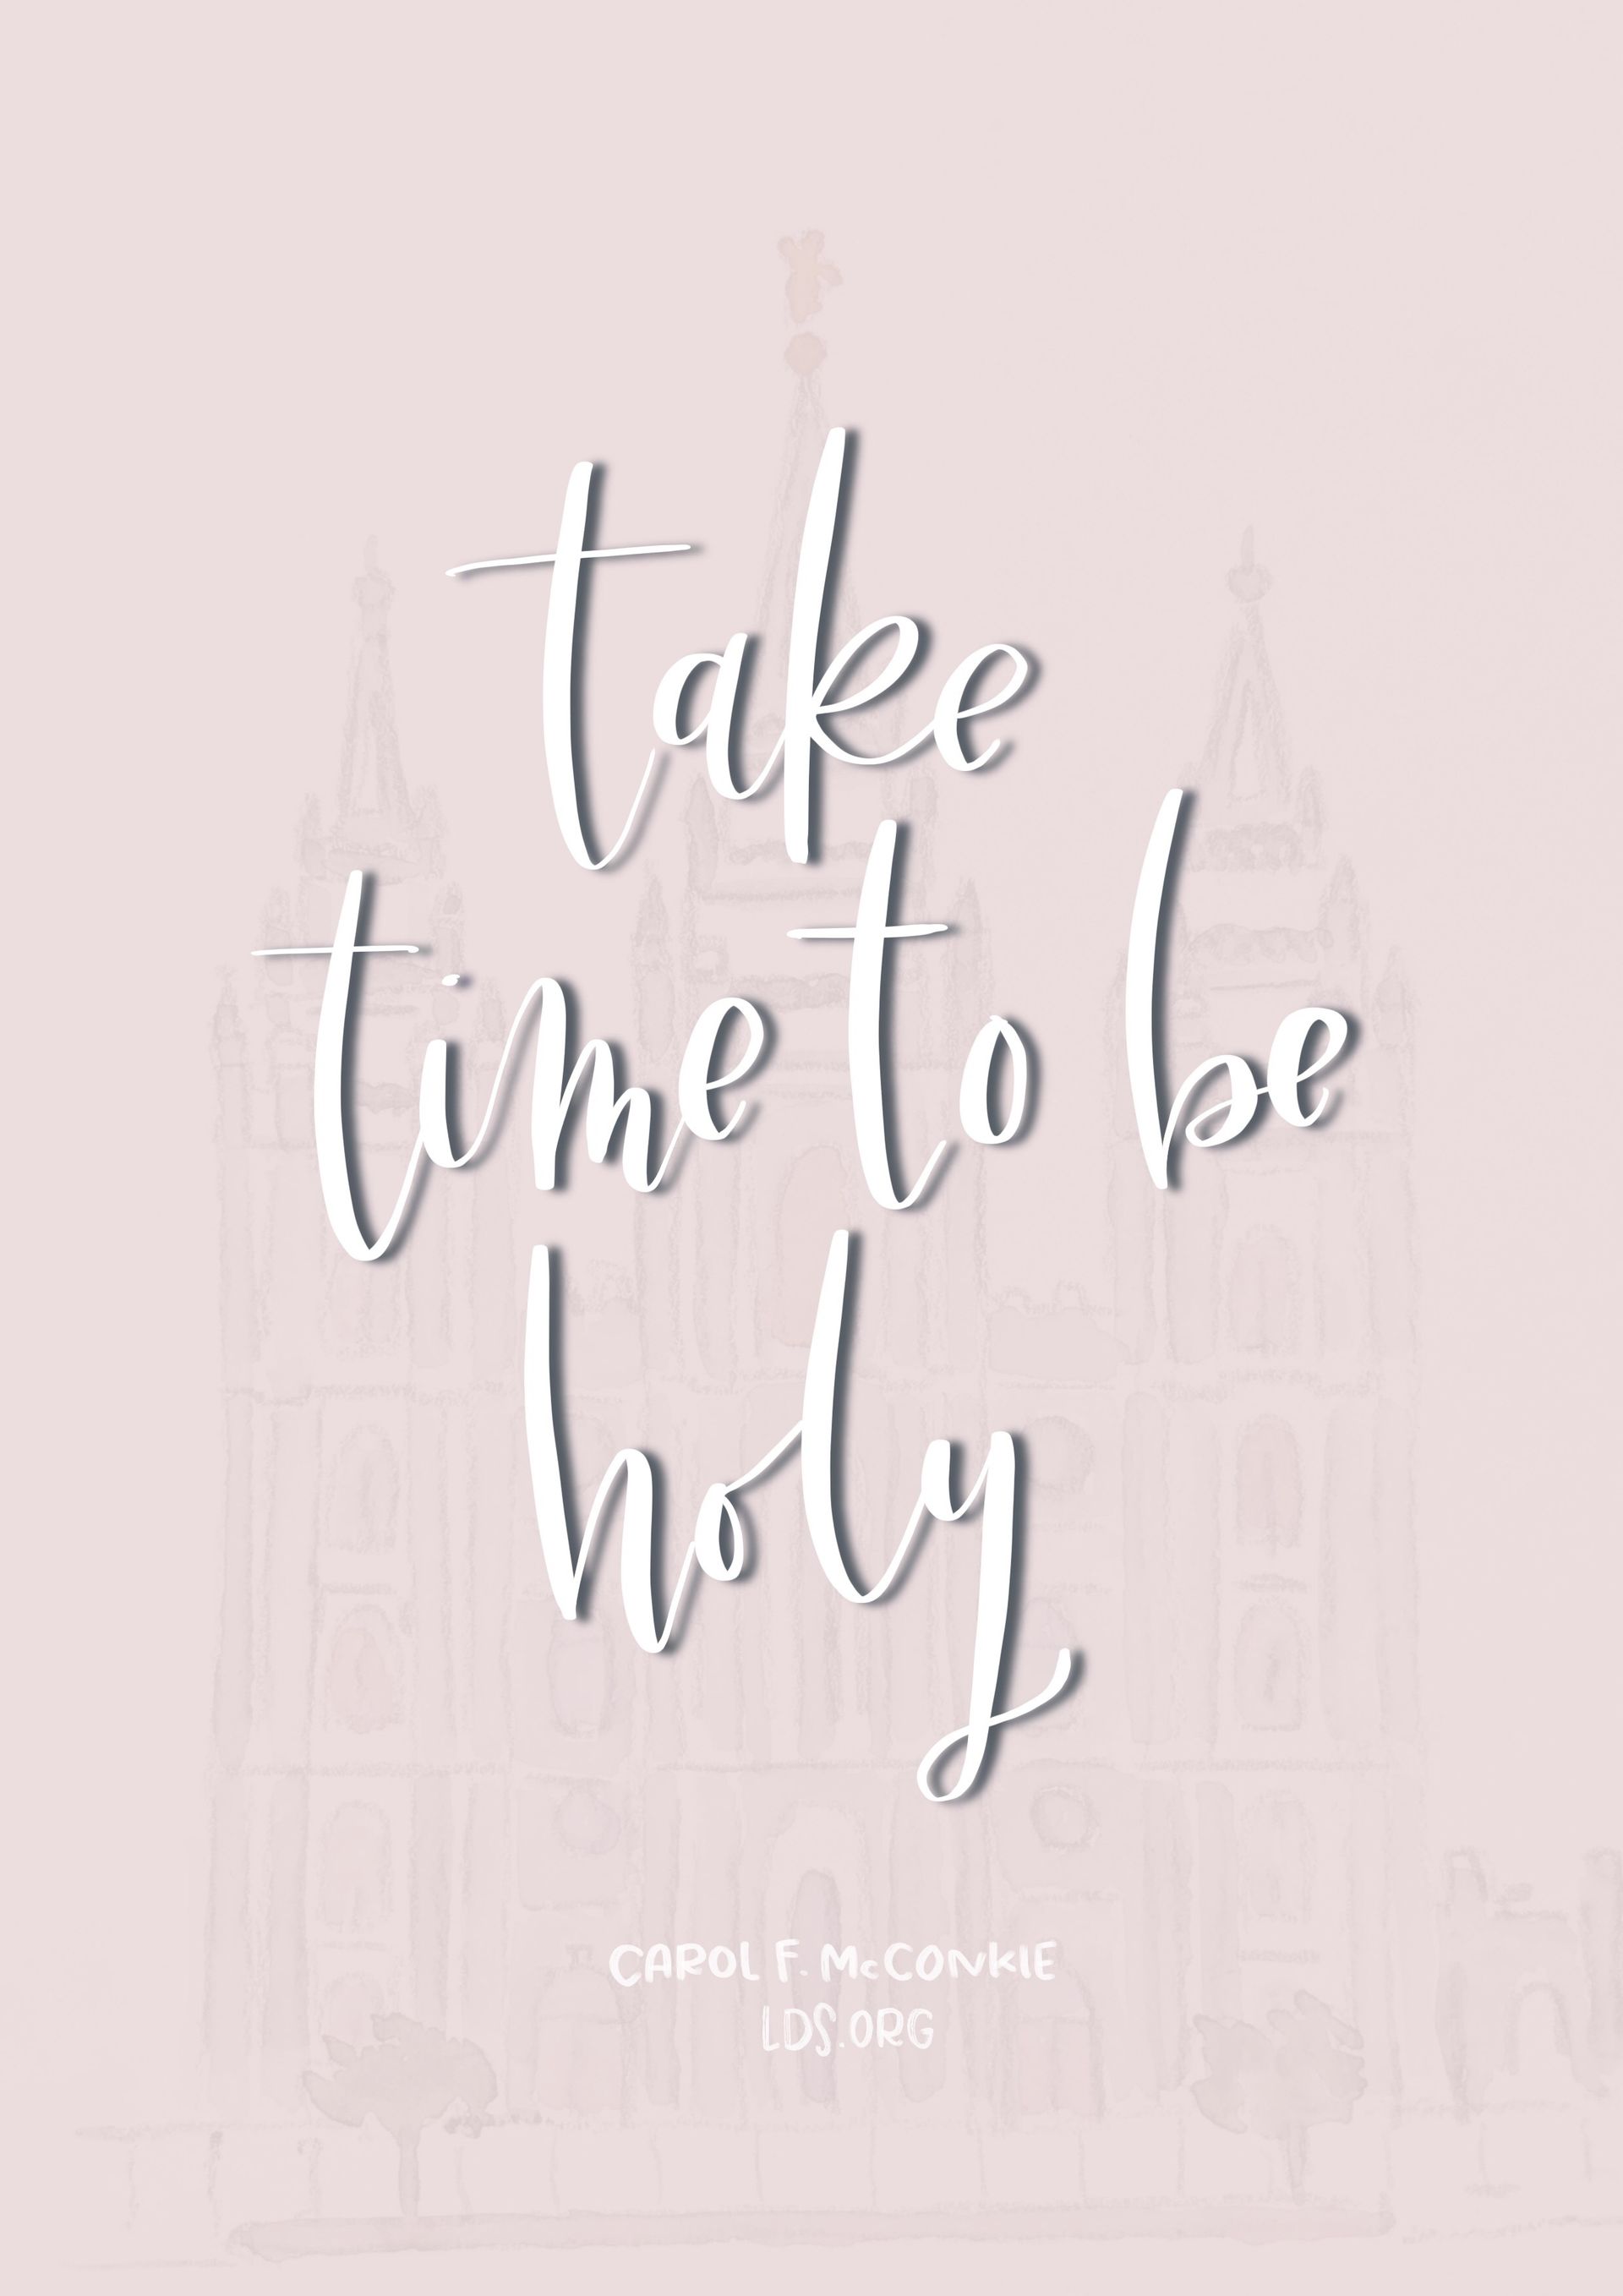 “Take time to be holy.”—Carol F. McConkie, “The Beauty of Holiness” Created by Jenae Nelson.